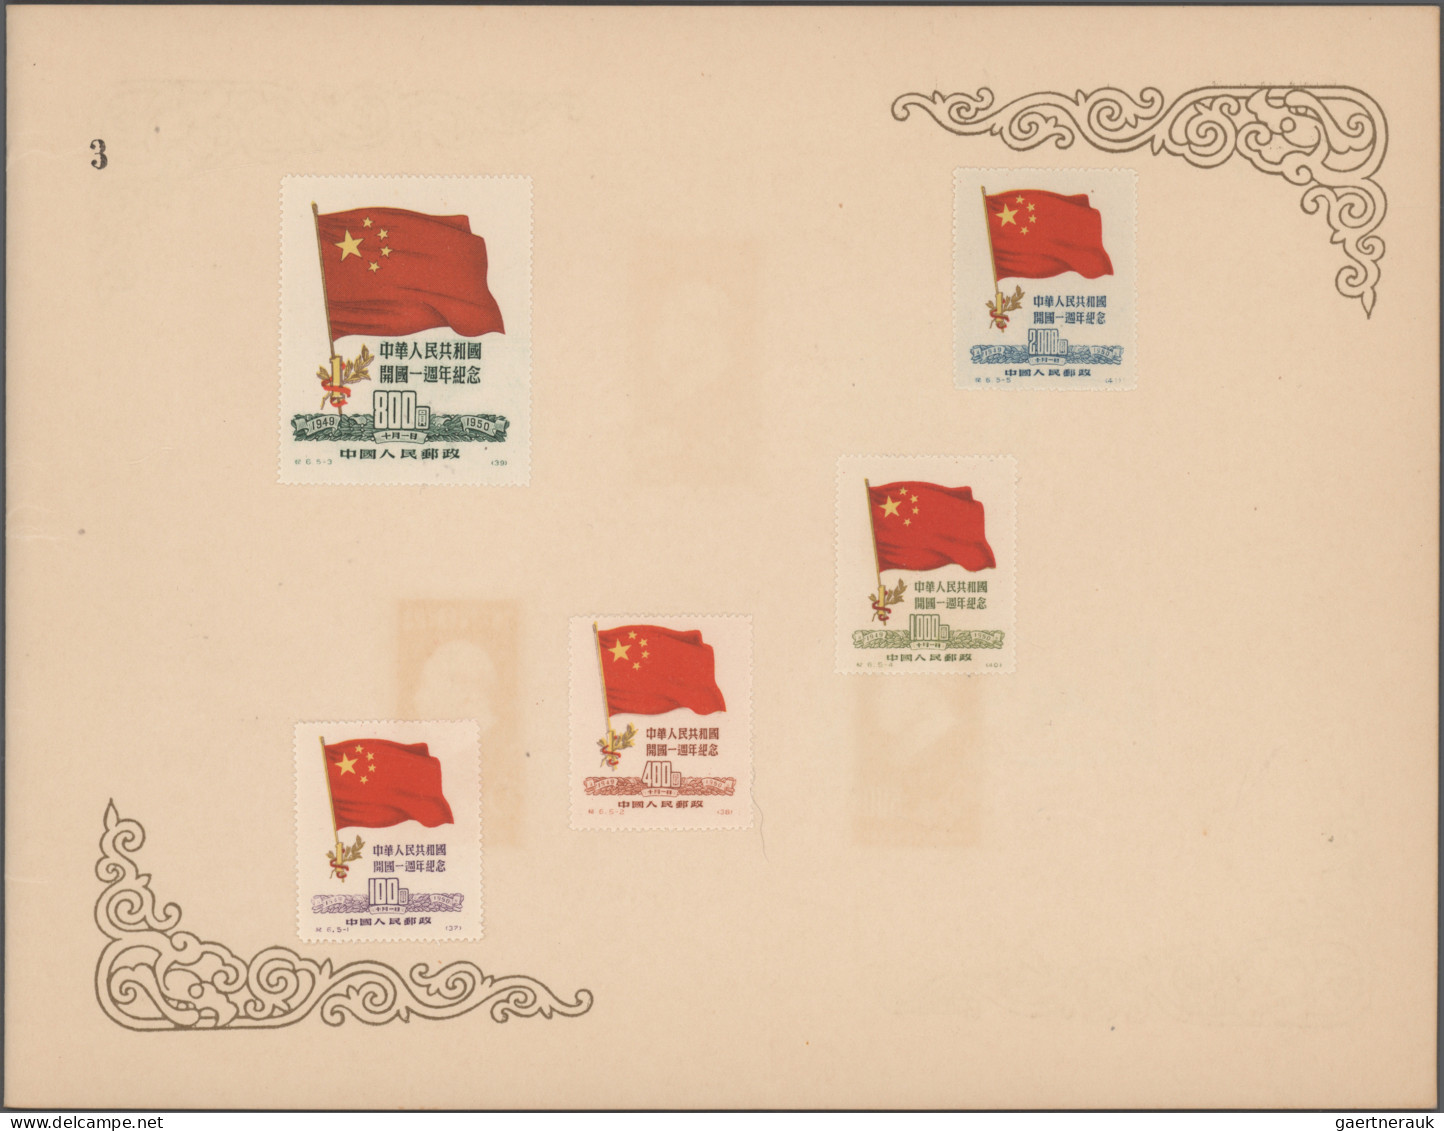 China (PRC): 1949/52, decorative and probably official booklet with 15 commemora